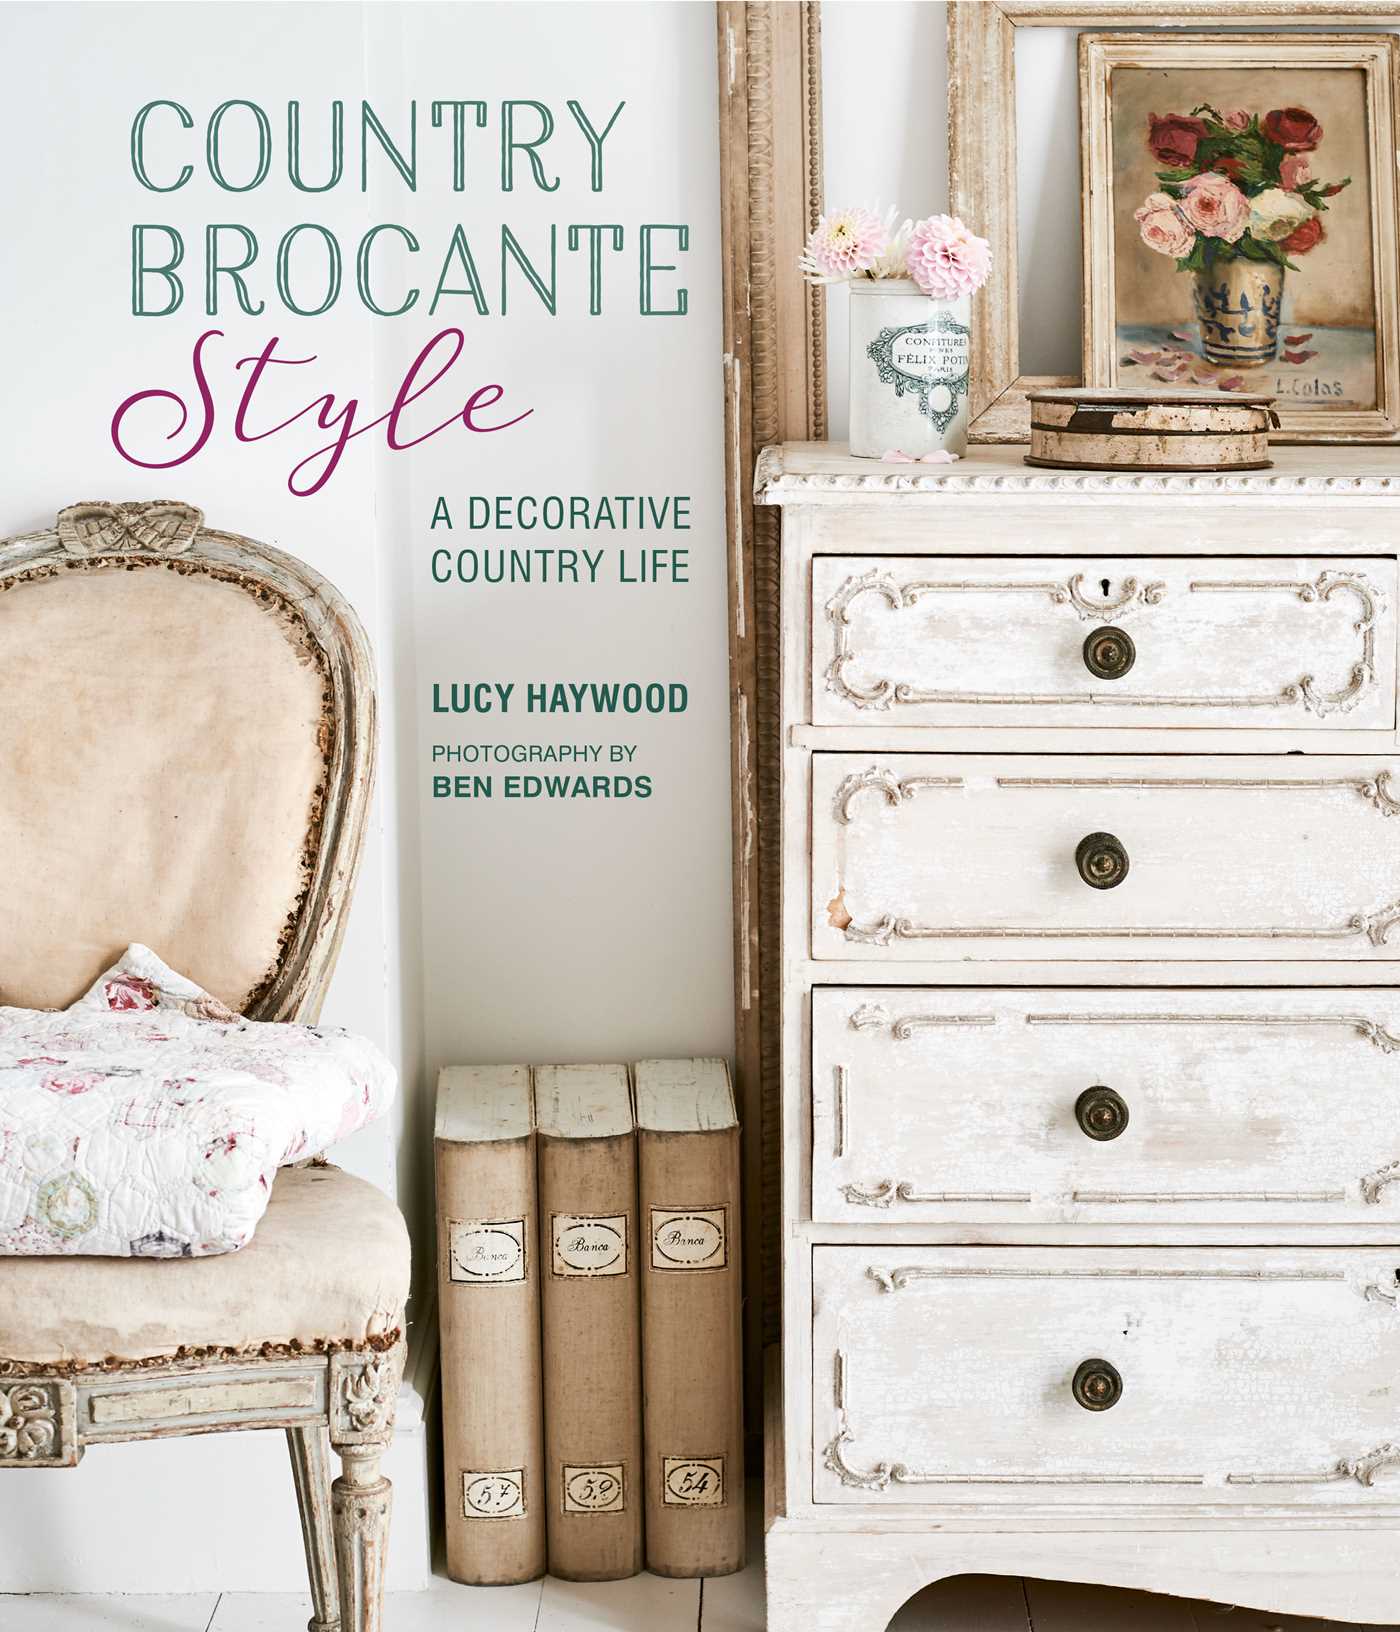 Country Brocante Style : Where English Country Meets French Vintage